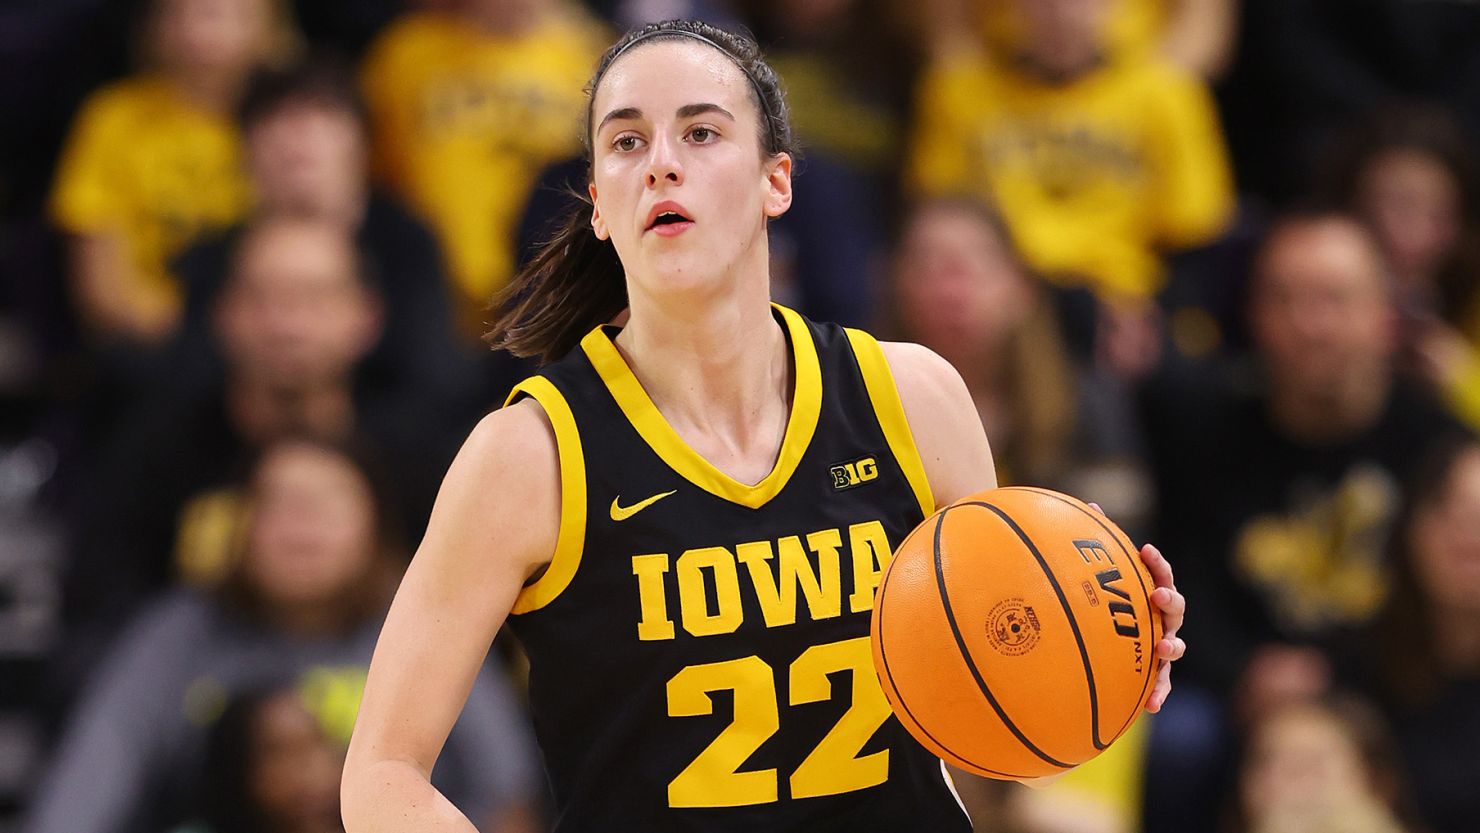 EVANSTON, ILLINOIS - JANUARY 31: Caitlin Clark #22 of the Iowa Hawkeyes dribbles up the court against the Northwestern Wildcats during the first half at Welsh-Ryan Arena on January 31, 2024 in Evanston, Illinois. (Photo by Michael Reaves/Getty Images)